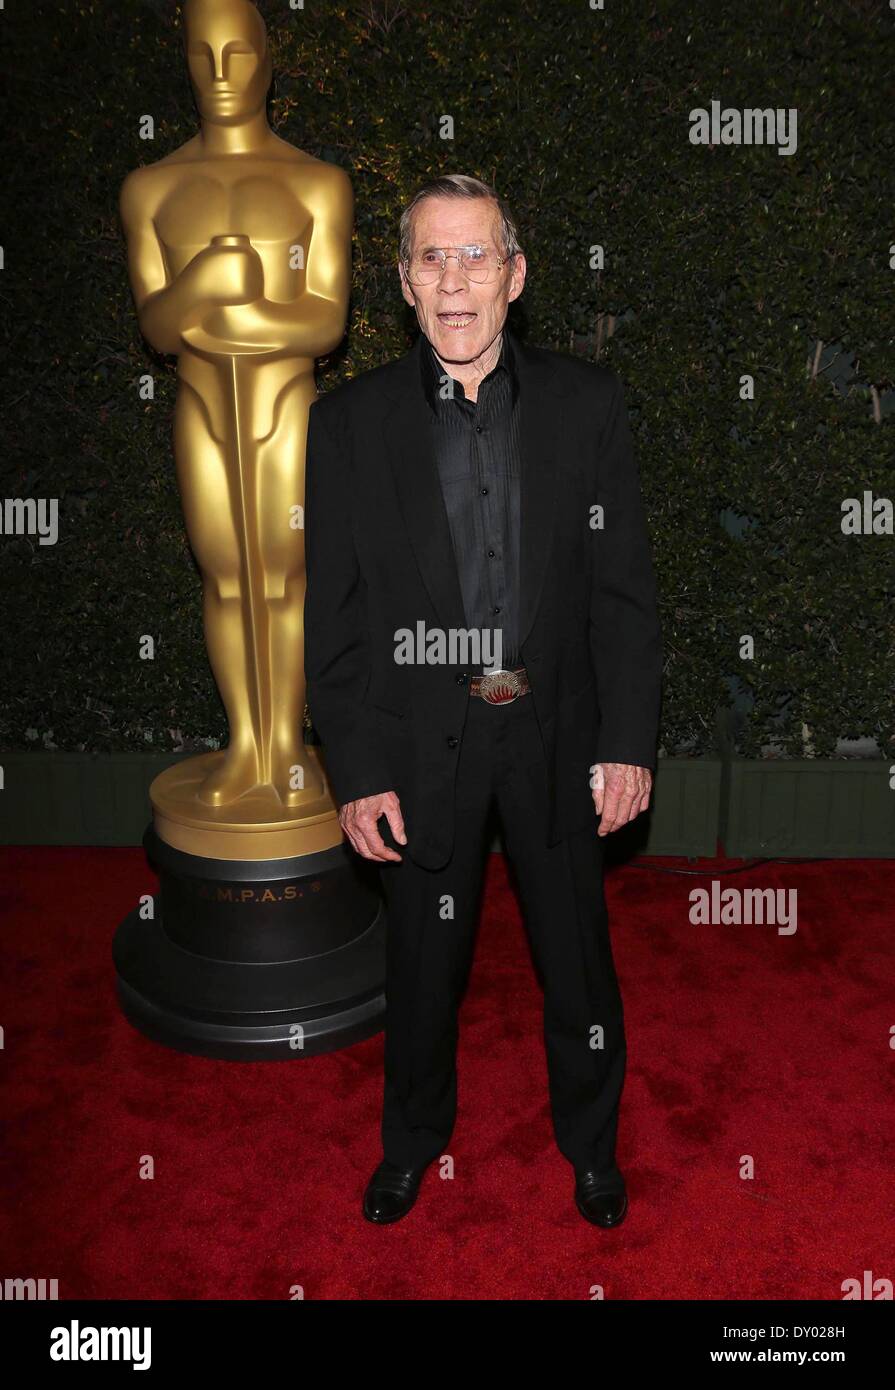 The Academy of Motion Pictures Arts and Sciences' Governors Awards - Arrivals Featuring: Hal Needham Where: Los Angeles California United States When: 02 Dec 2012 Stock Photo